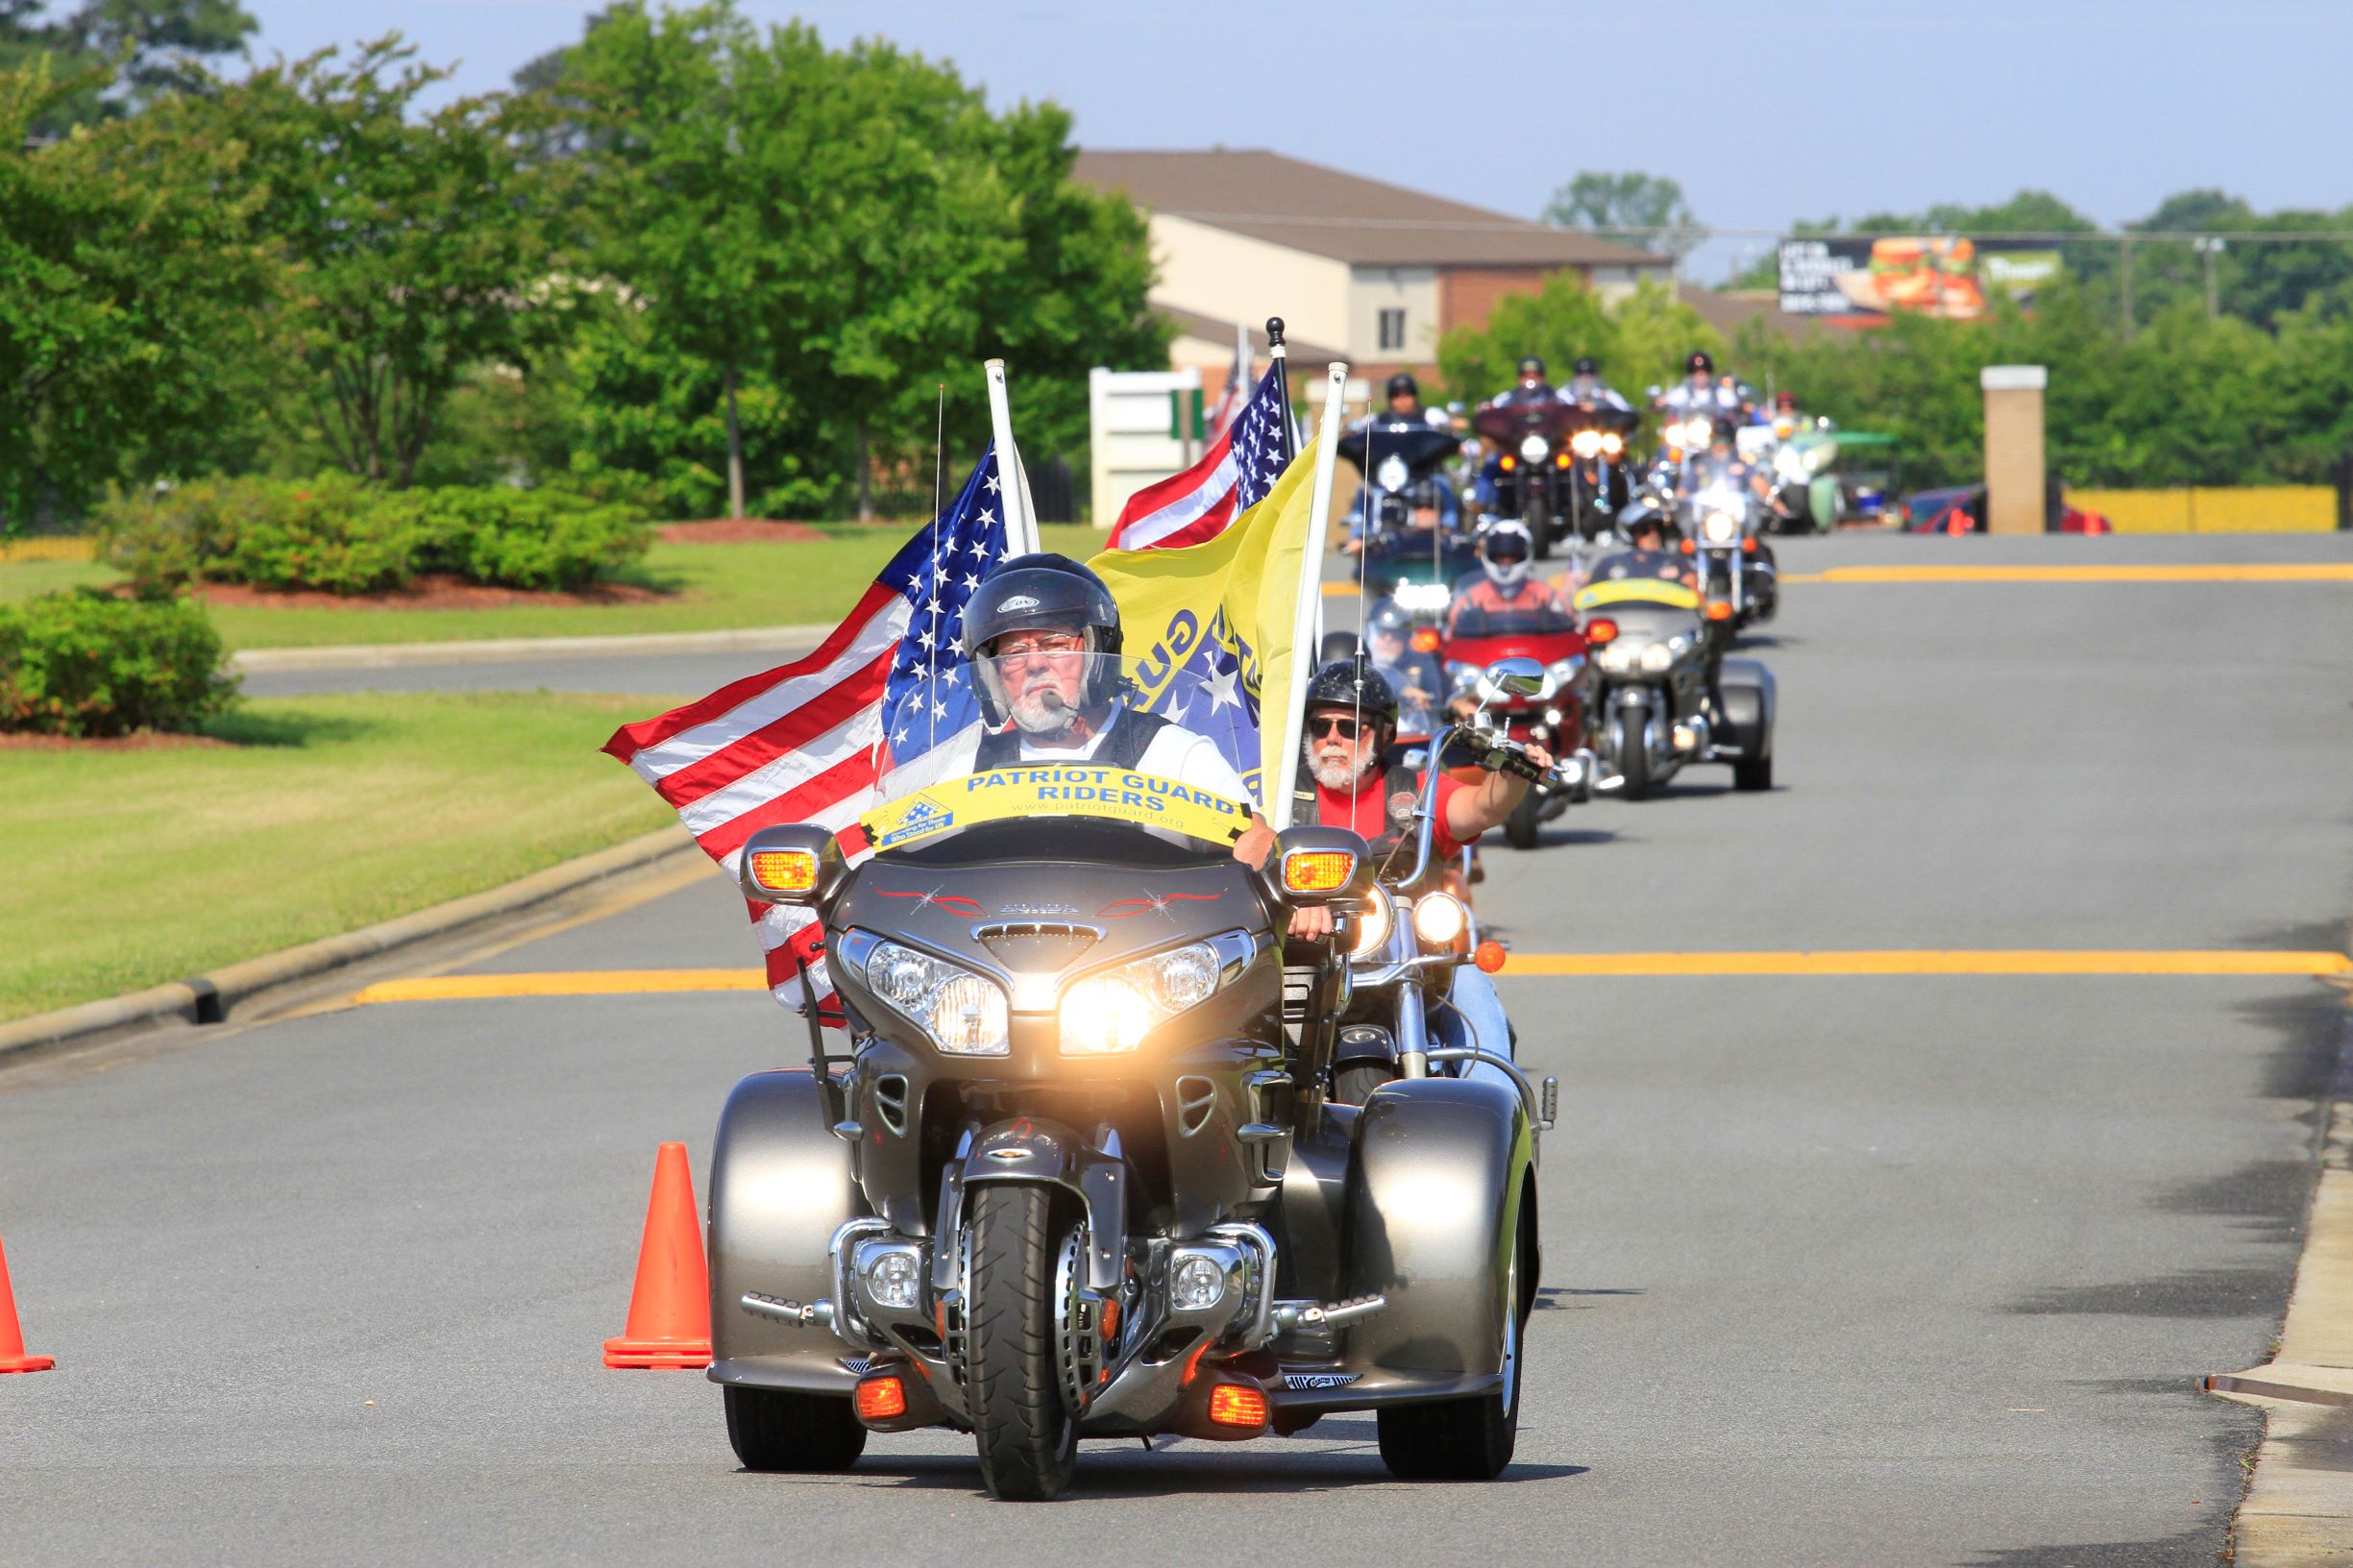 Patriot Guard Riders Accompany USAF Veteran To Final Resting Place (PHOTOS)